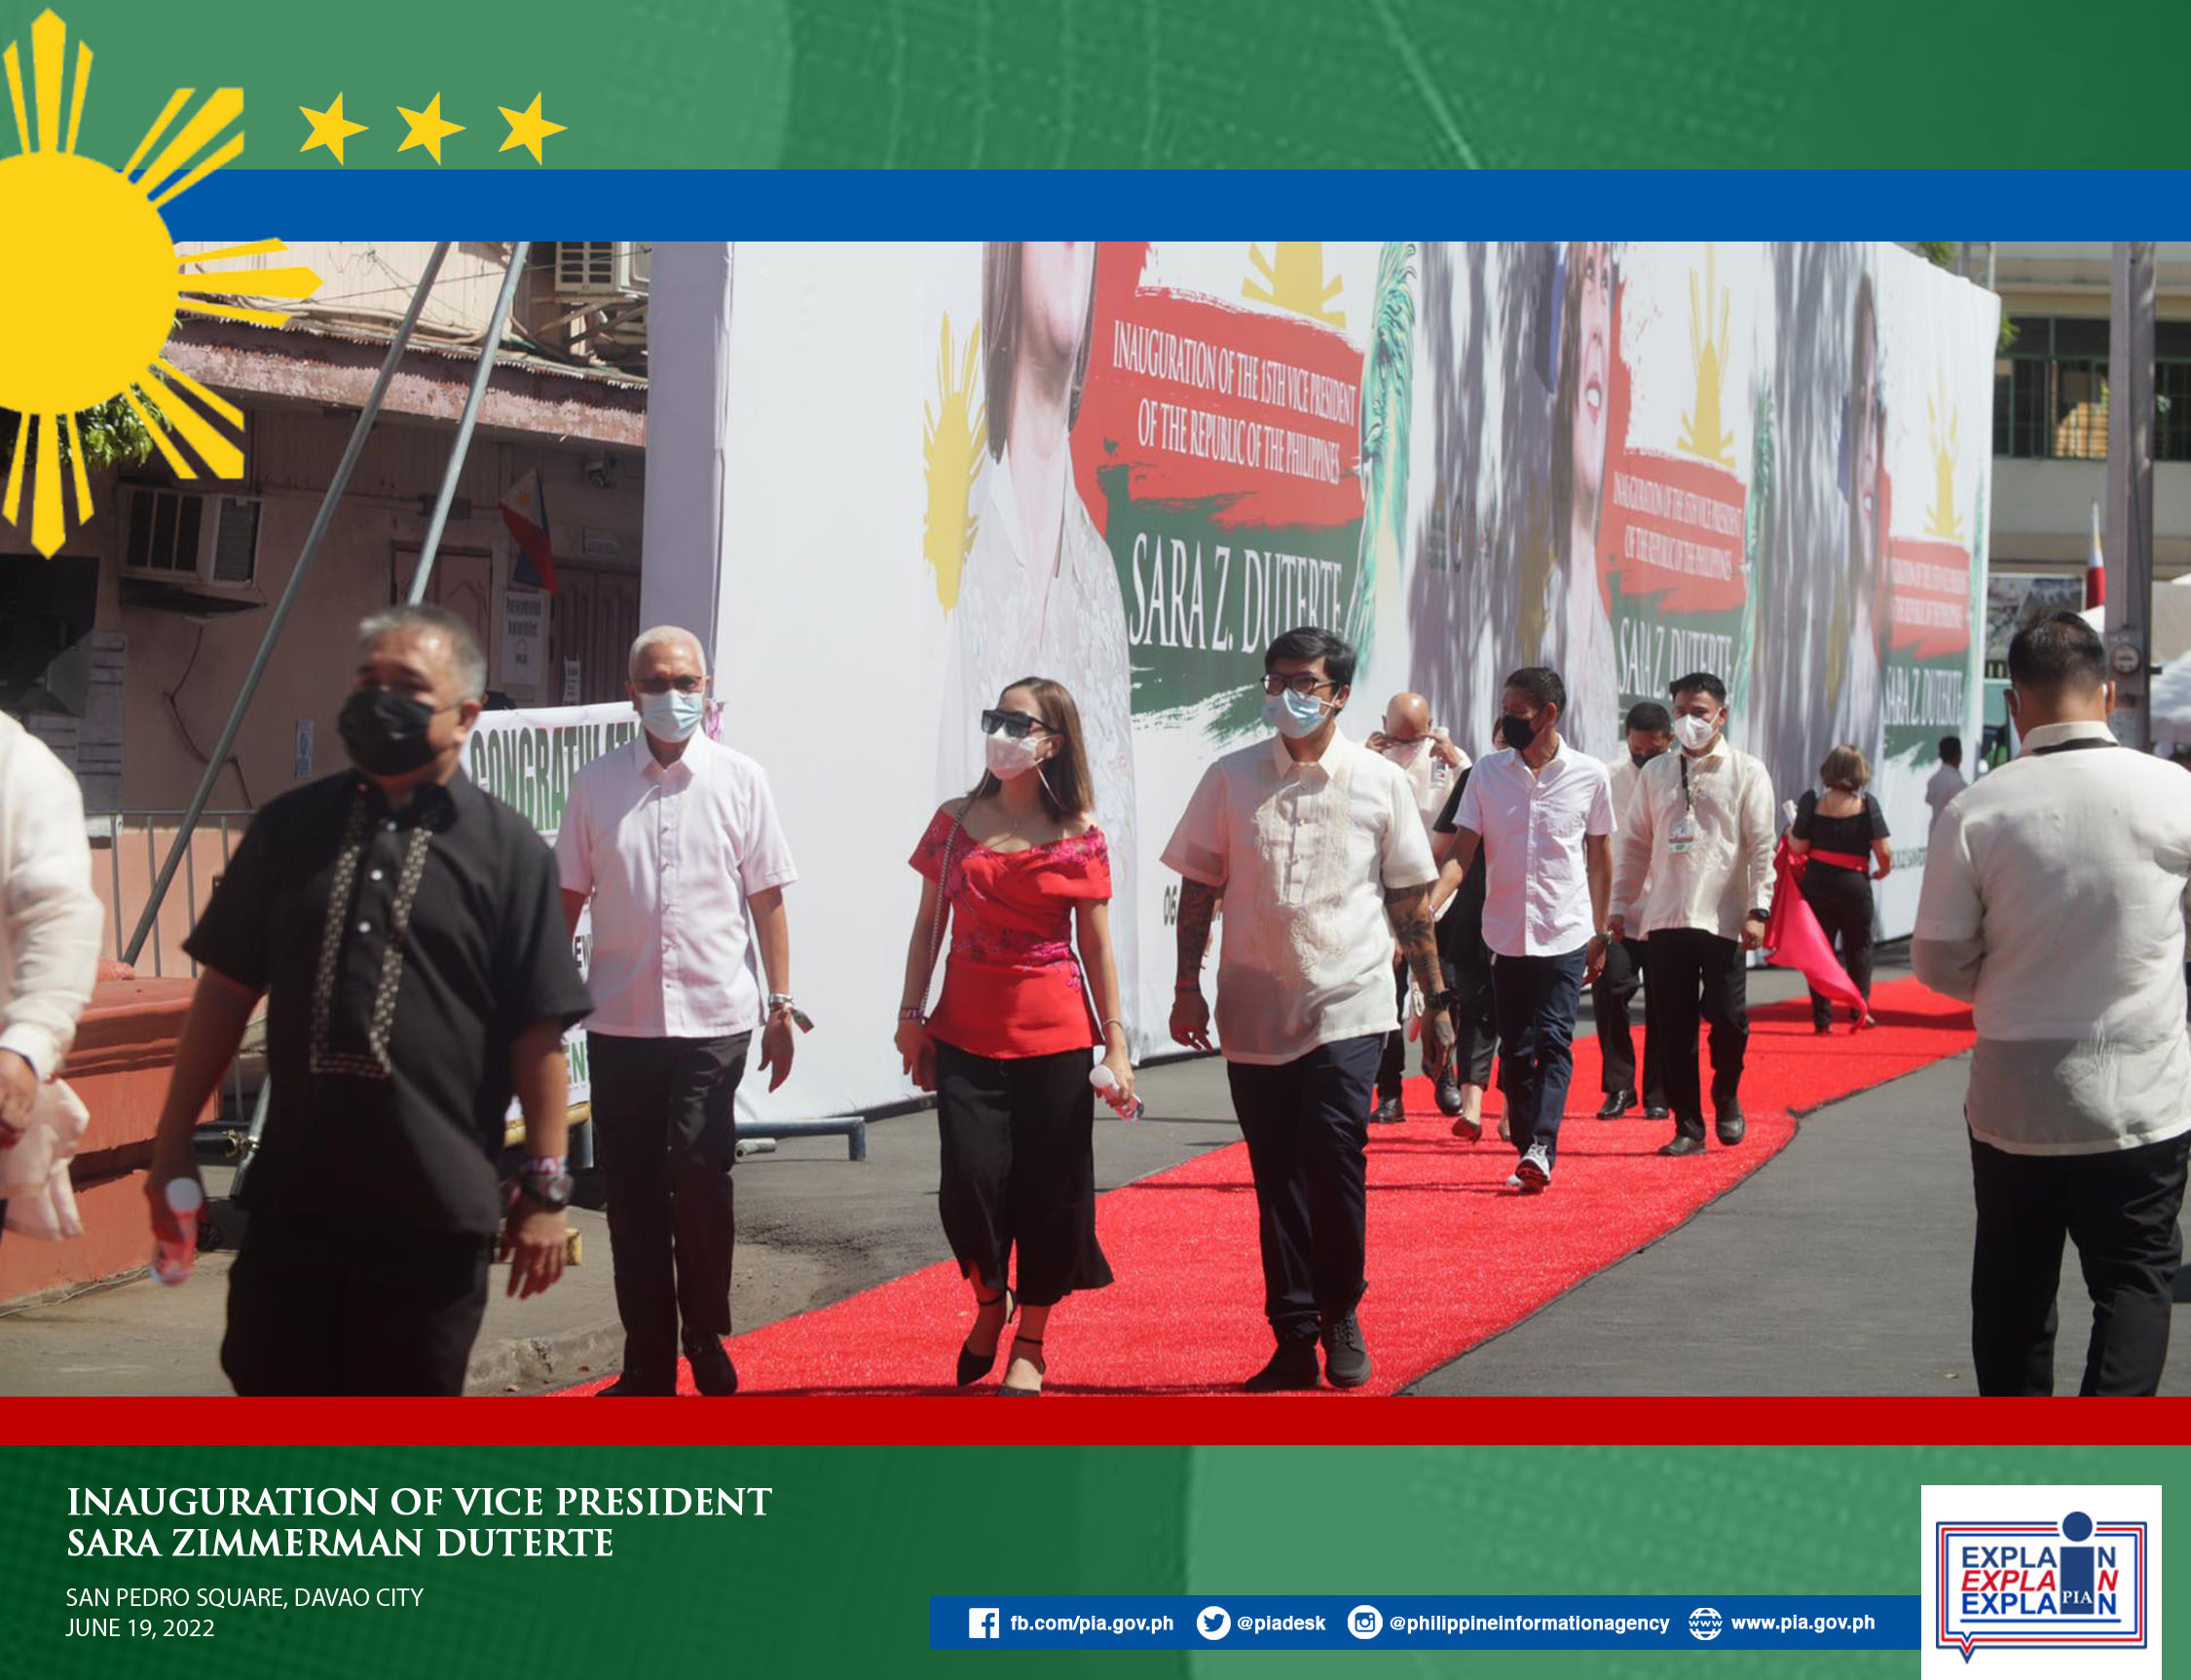 VIPs arriving at the venue of the Inauguration of Vice-President elect Sara Duterte